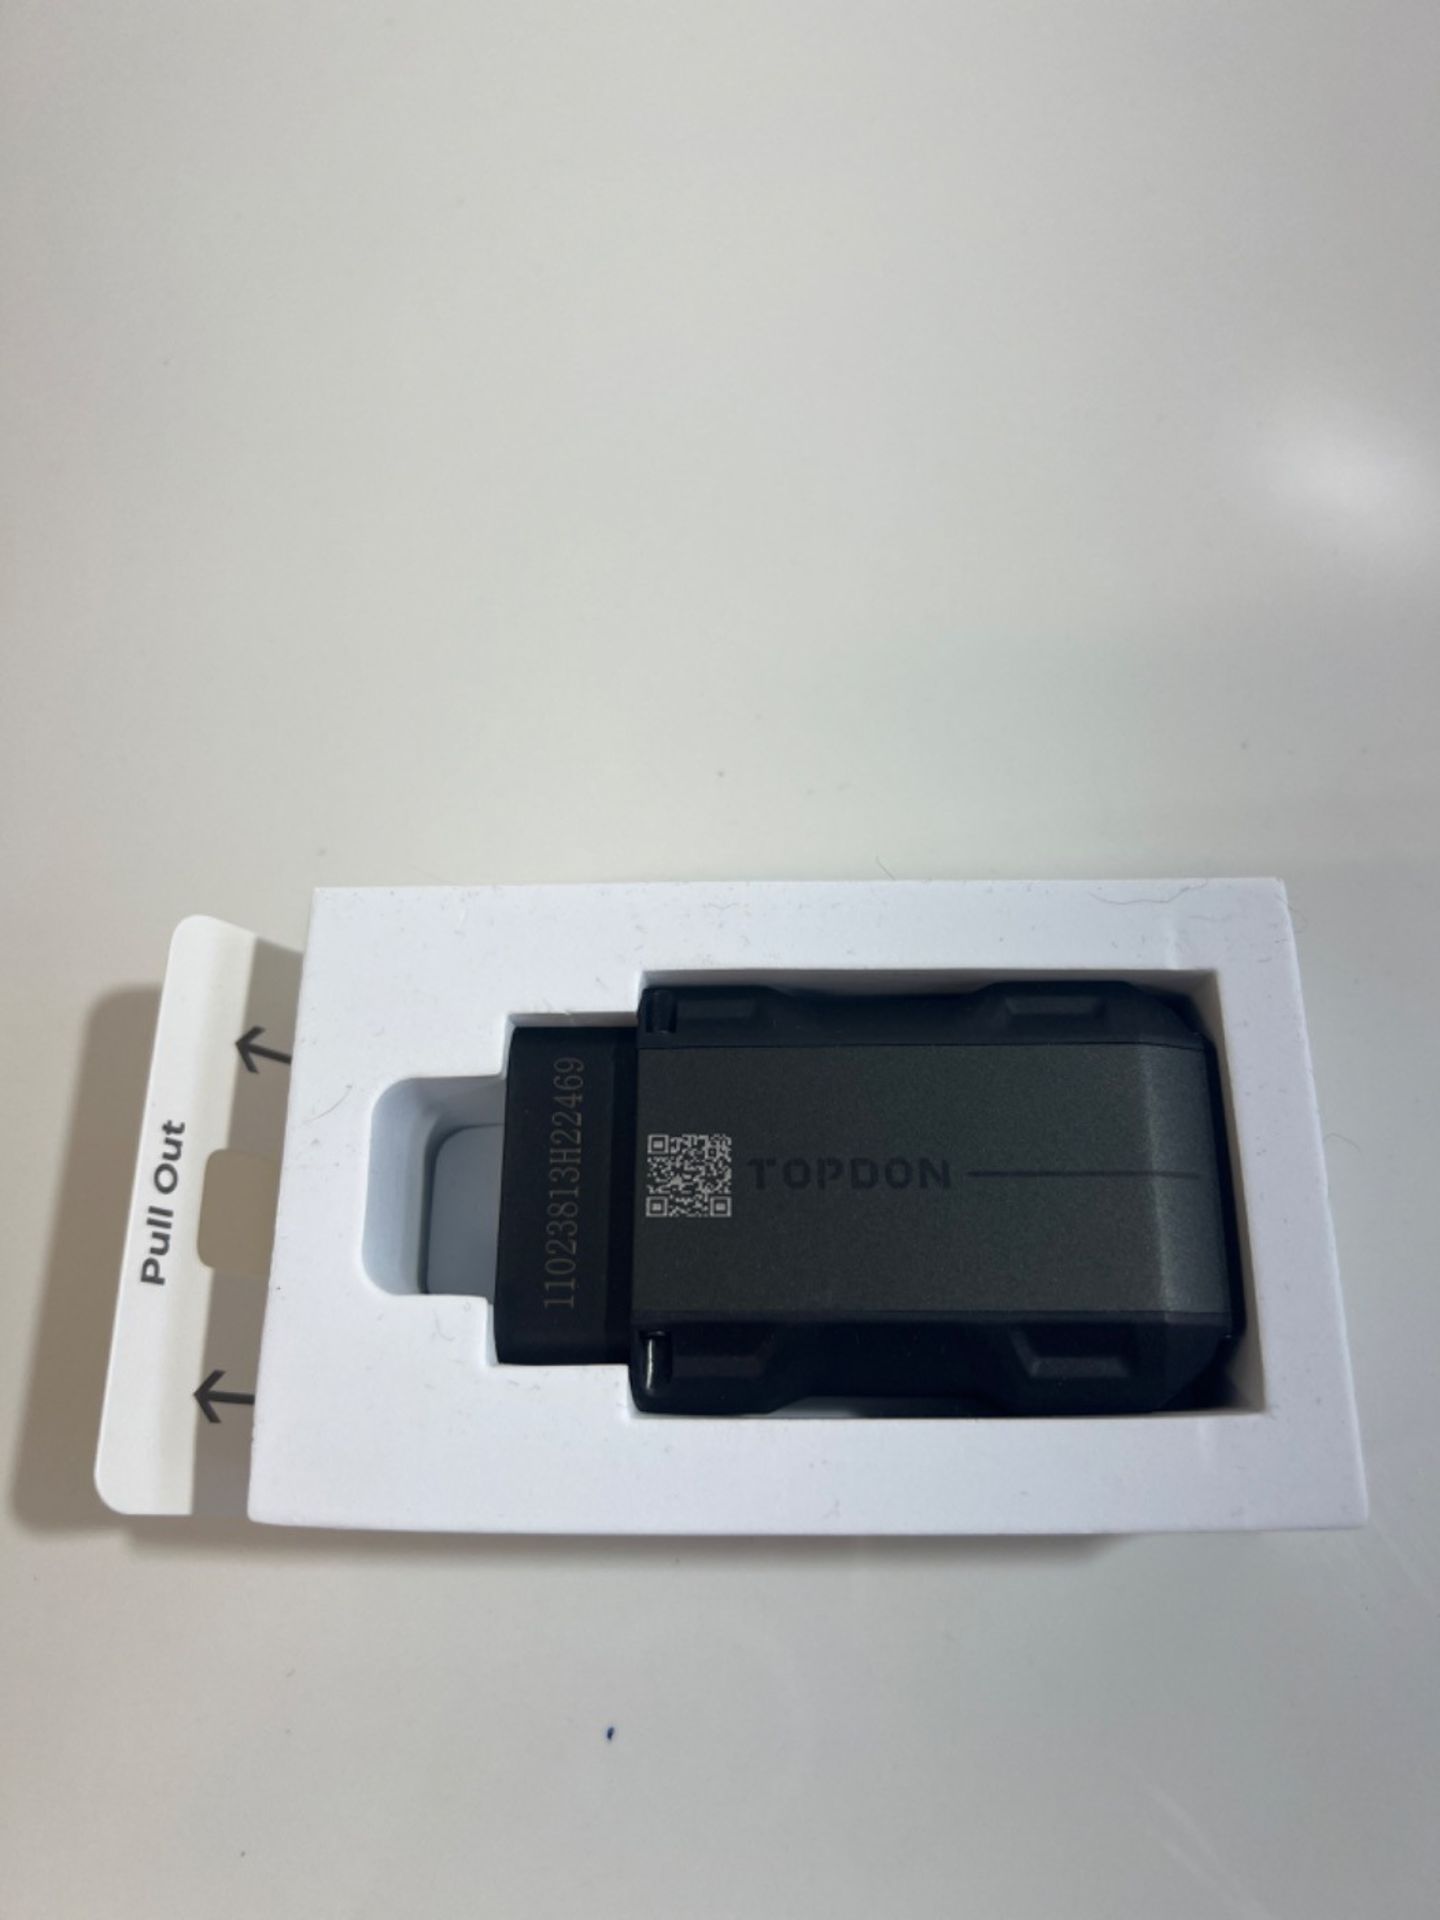 TOPDON Topscan OBD2 Scanner Bluetooth, Wireless OBD2 Code Reader with Active Test, 8 Reset, Car Dia - Image 3 of 3